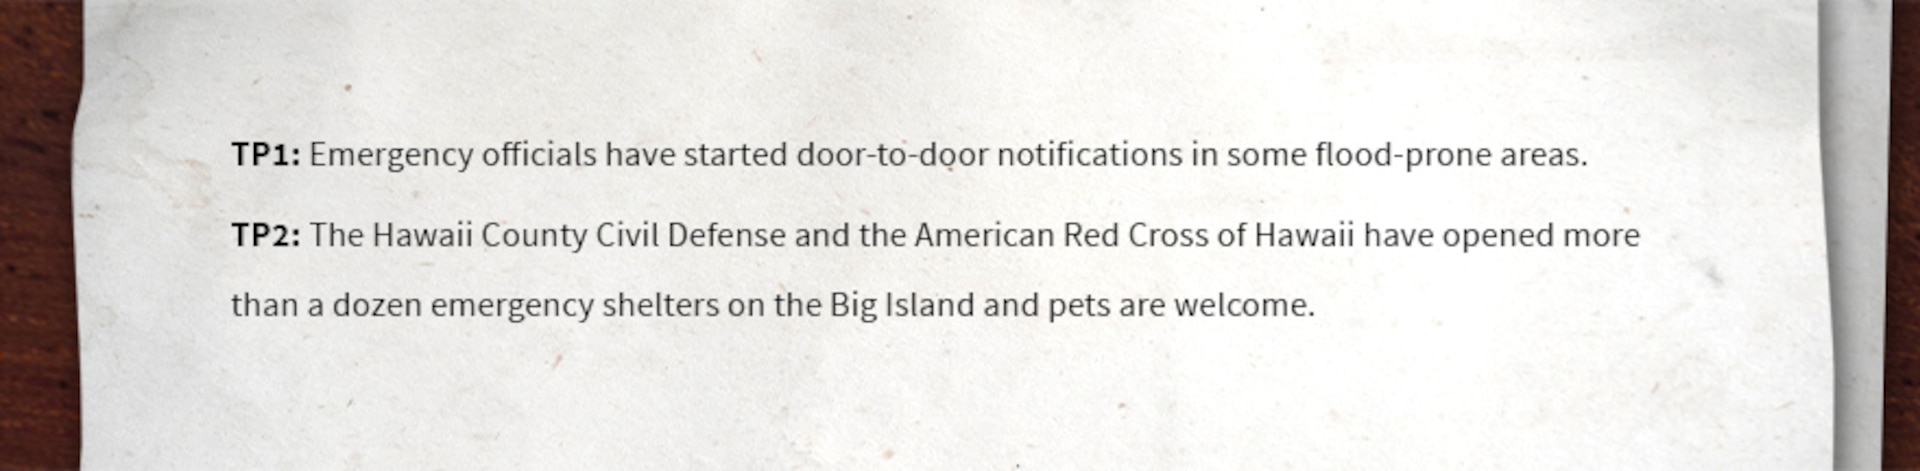 TP1: Emergency officials have started door-to-door notifications in some flood-prone areas.

TP2: The Hawaii County Civil Defense and the American Red Cross of Hawaii have opened more than a dozen emergency shelters on the Big Island and pets are welcome